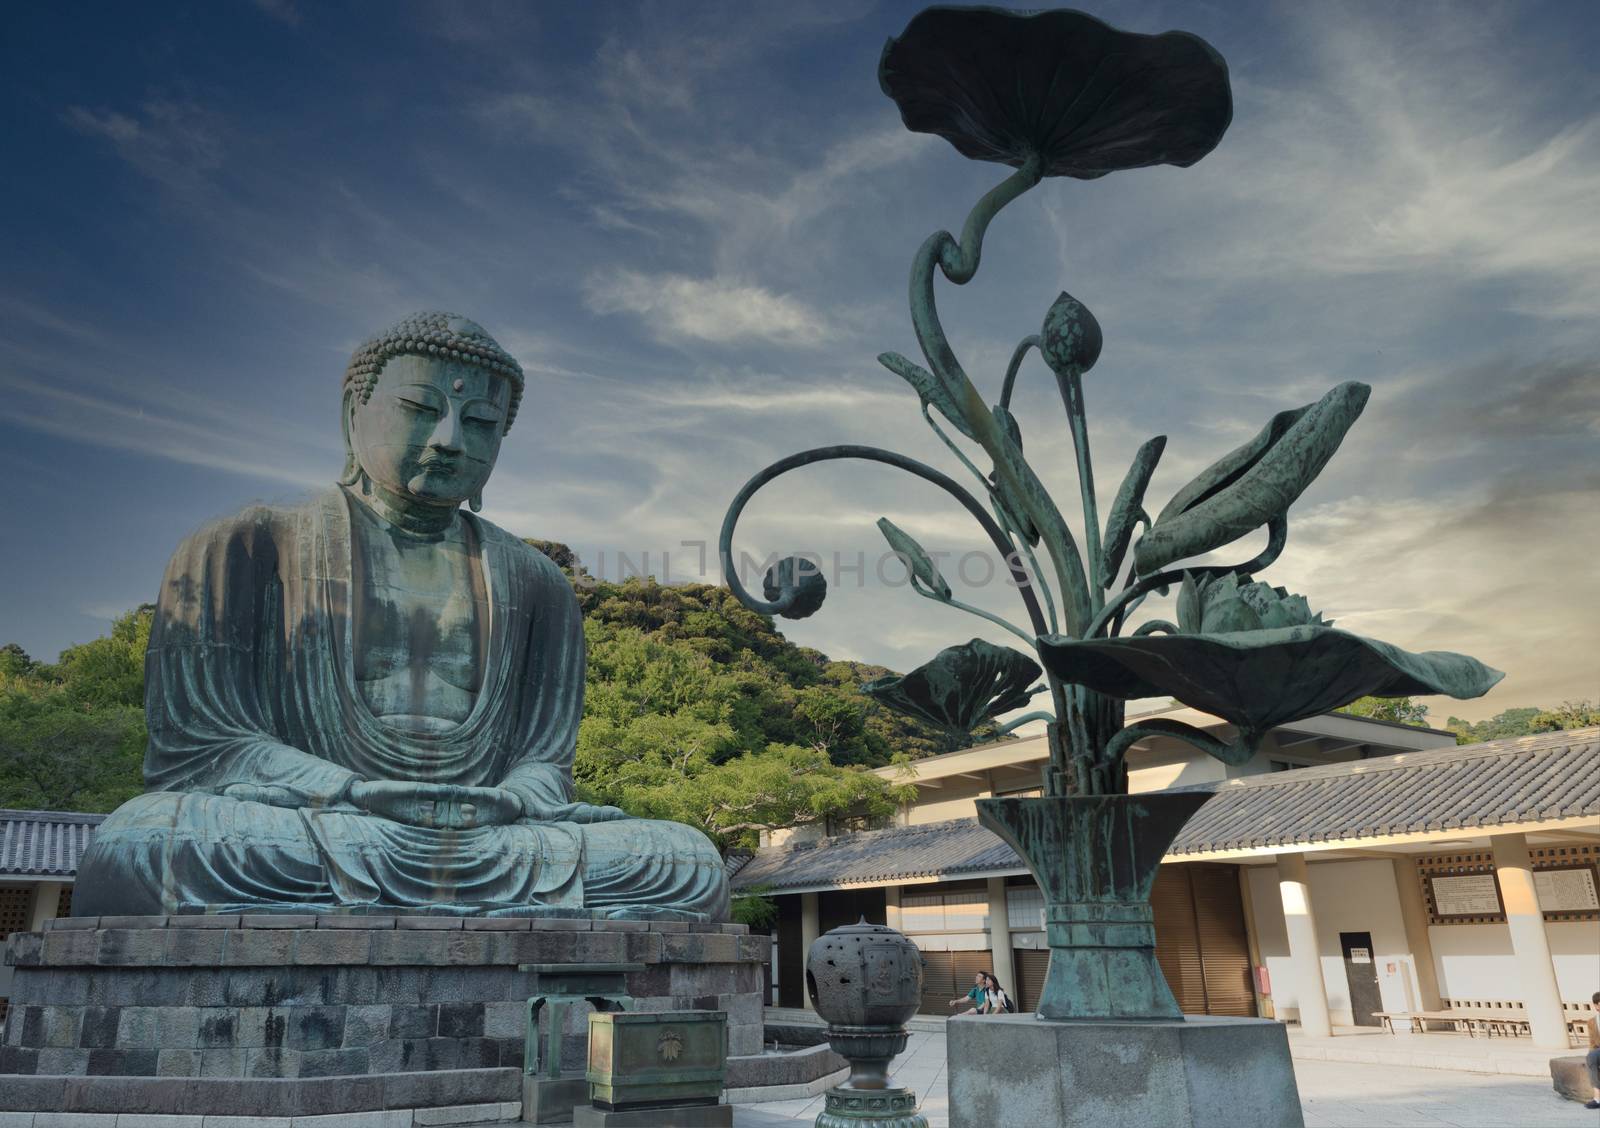 The second largest buddha temple called Kamakura located on the ground of the kotoku in kamakura city